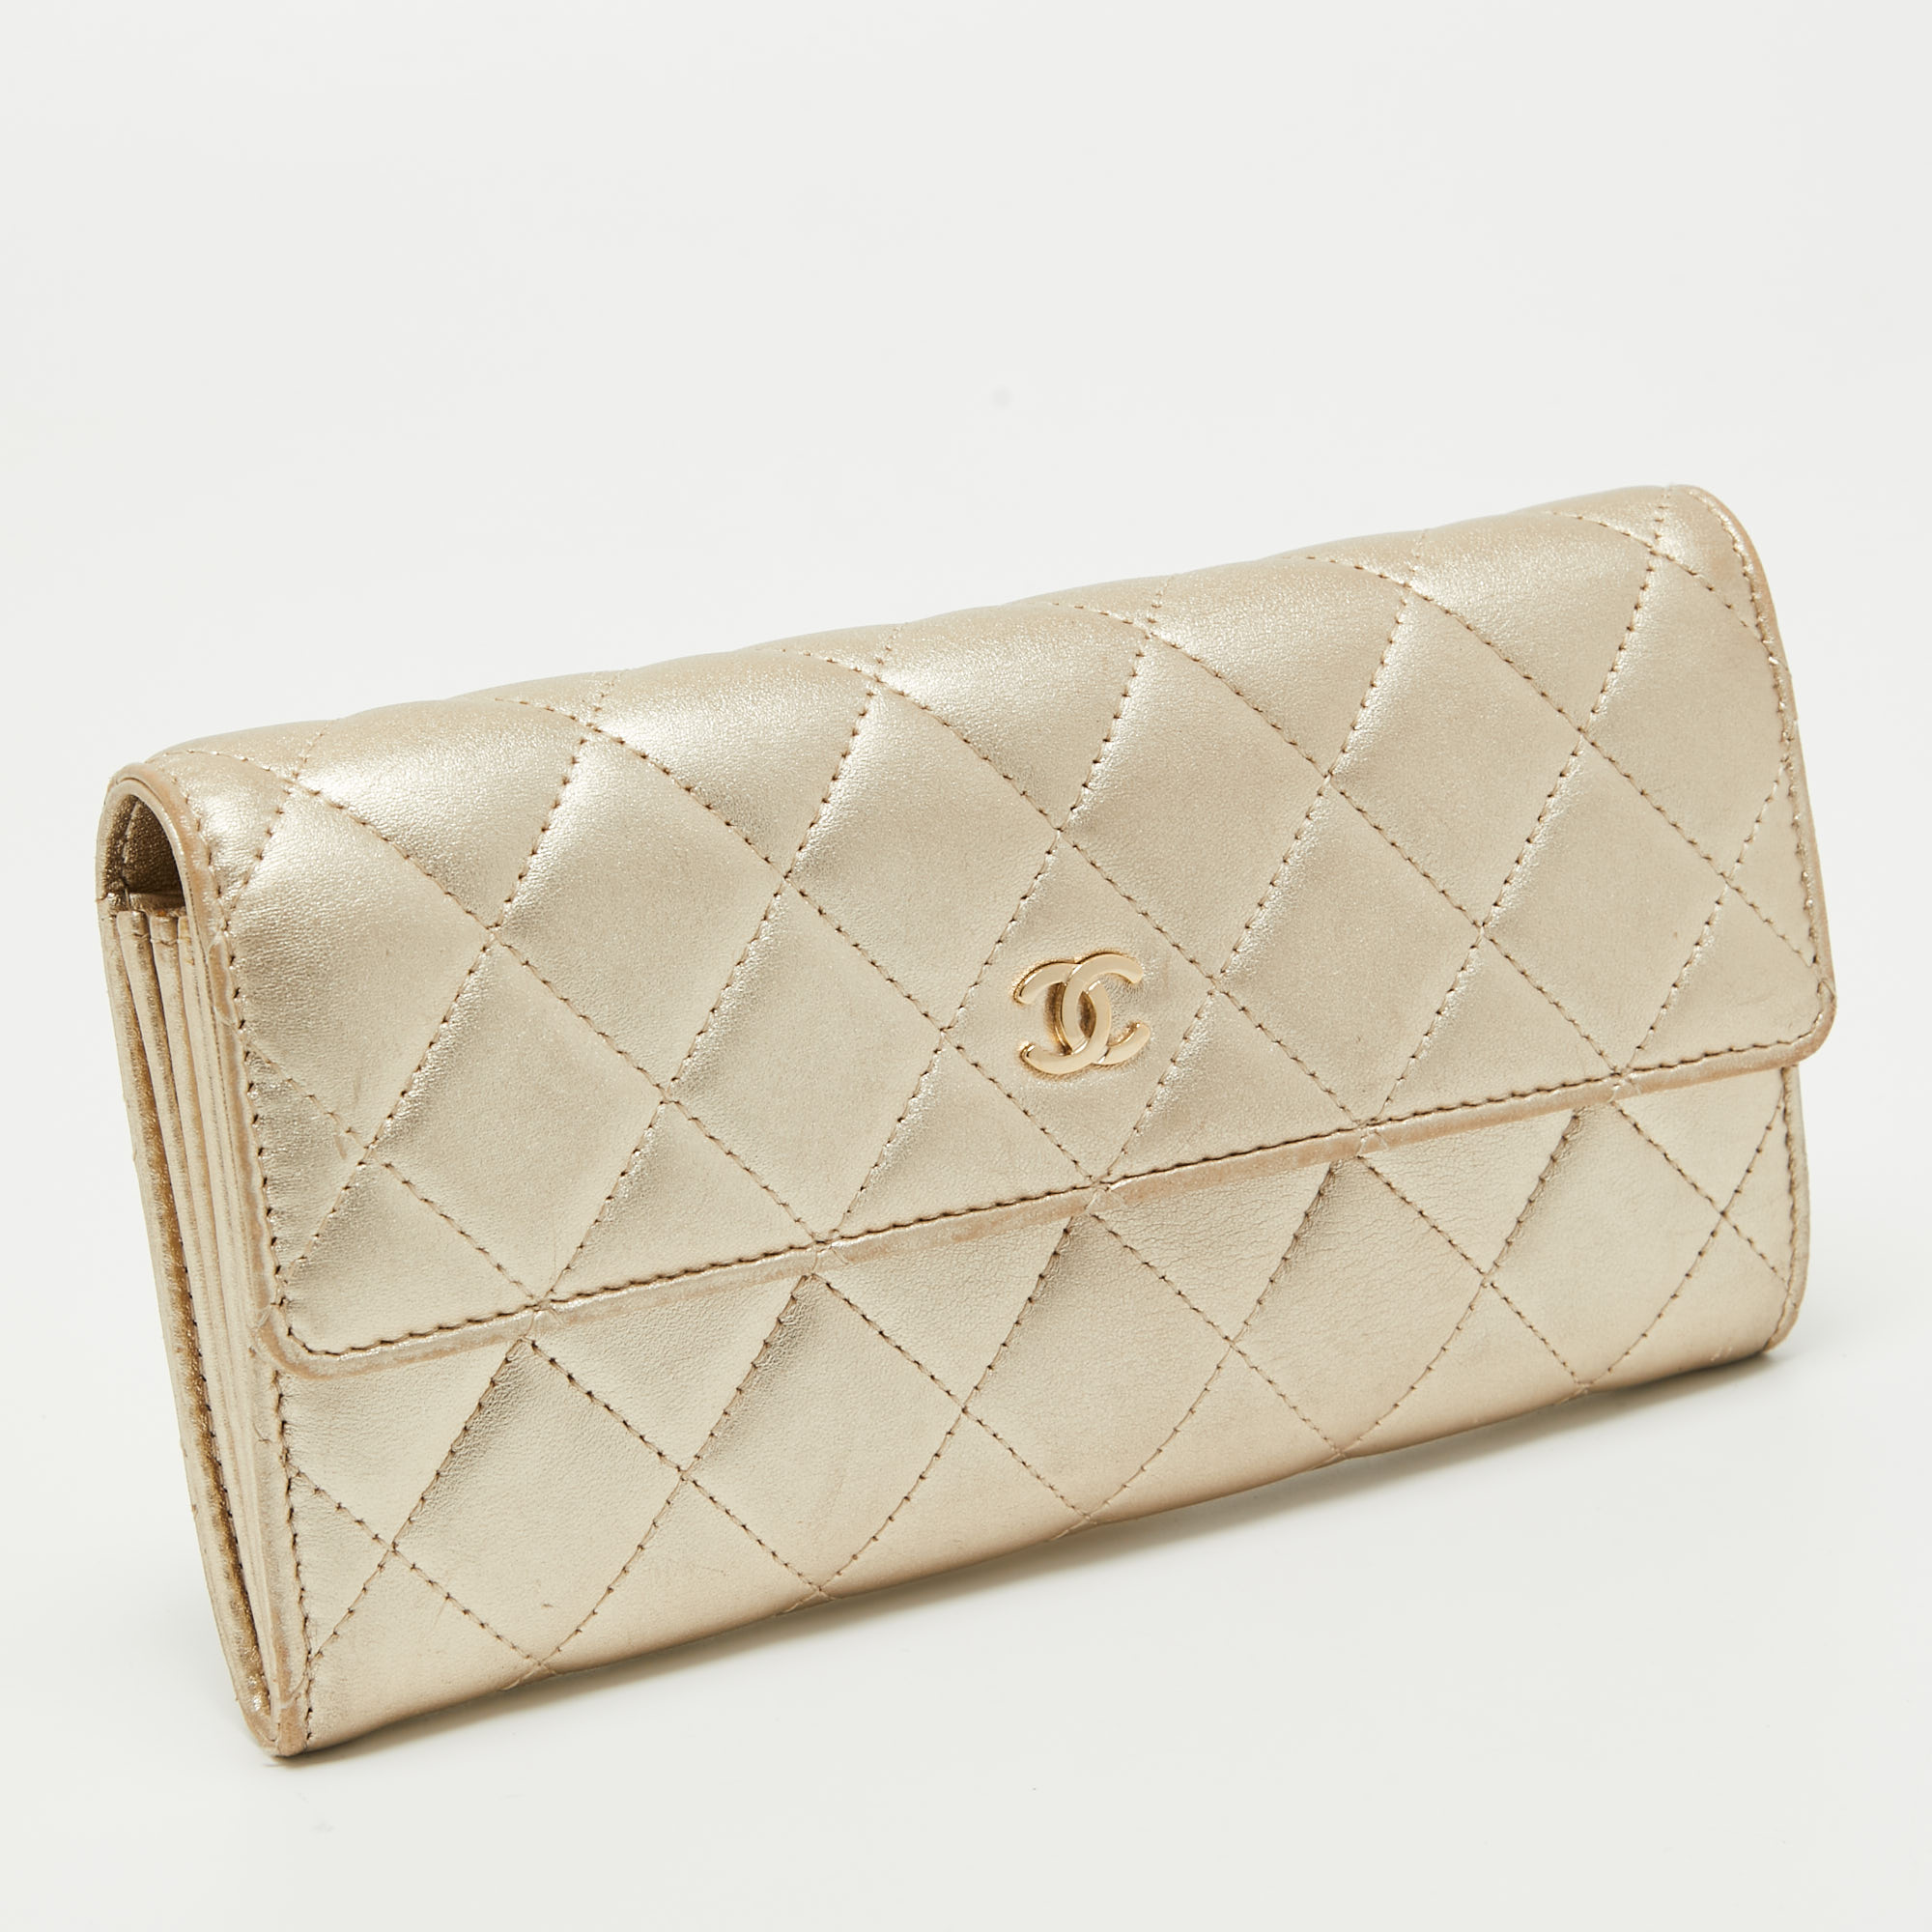 Chanel Gold Quilted Leather Classic Long Wallet